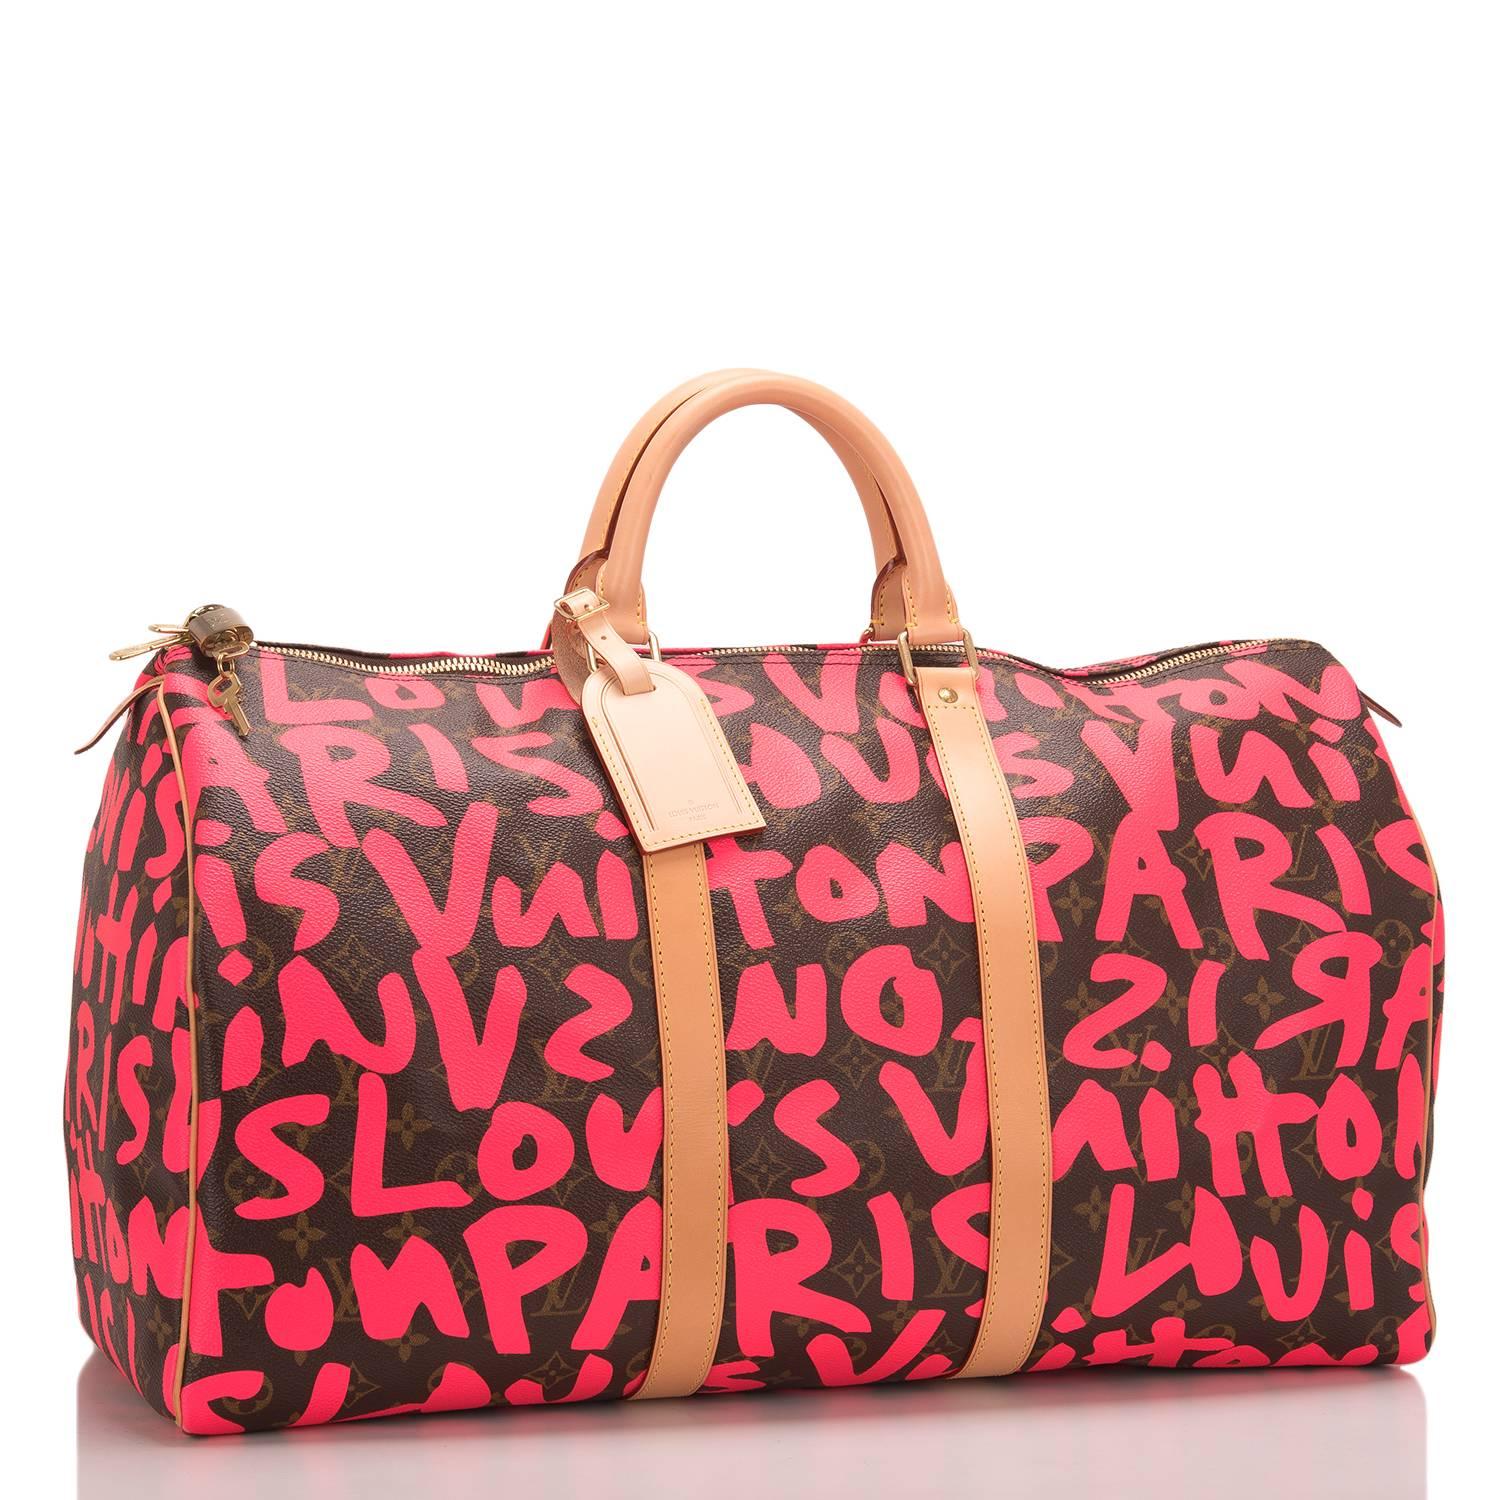 Louis Vuitton Pink Monogram Graffiti Keepall 50 of coated canvas with silk screened bright fluorescent pink colored graffiti lettering designed in tribute to Stephen Sprouse.

This classic travel bag features polished brass hardware, vachetta